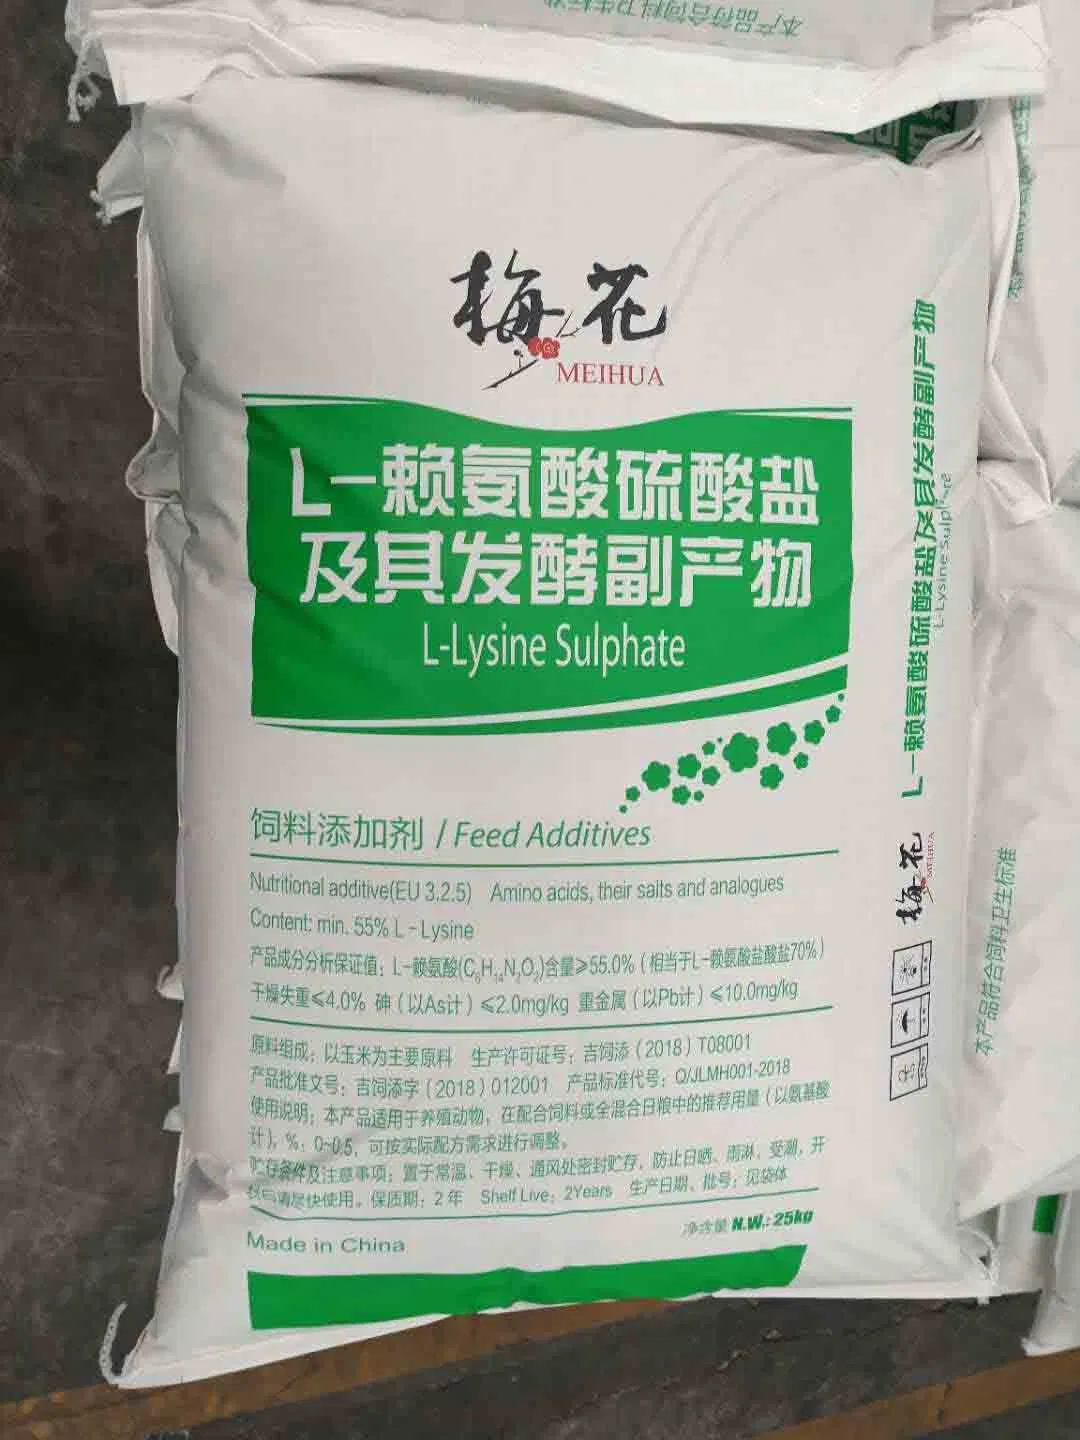 Brown Granular Solid L-Lysine Sulphate From Chinese Factory